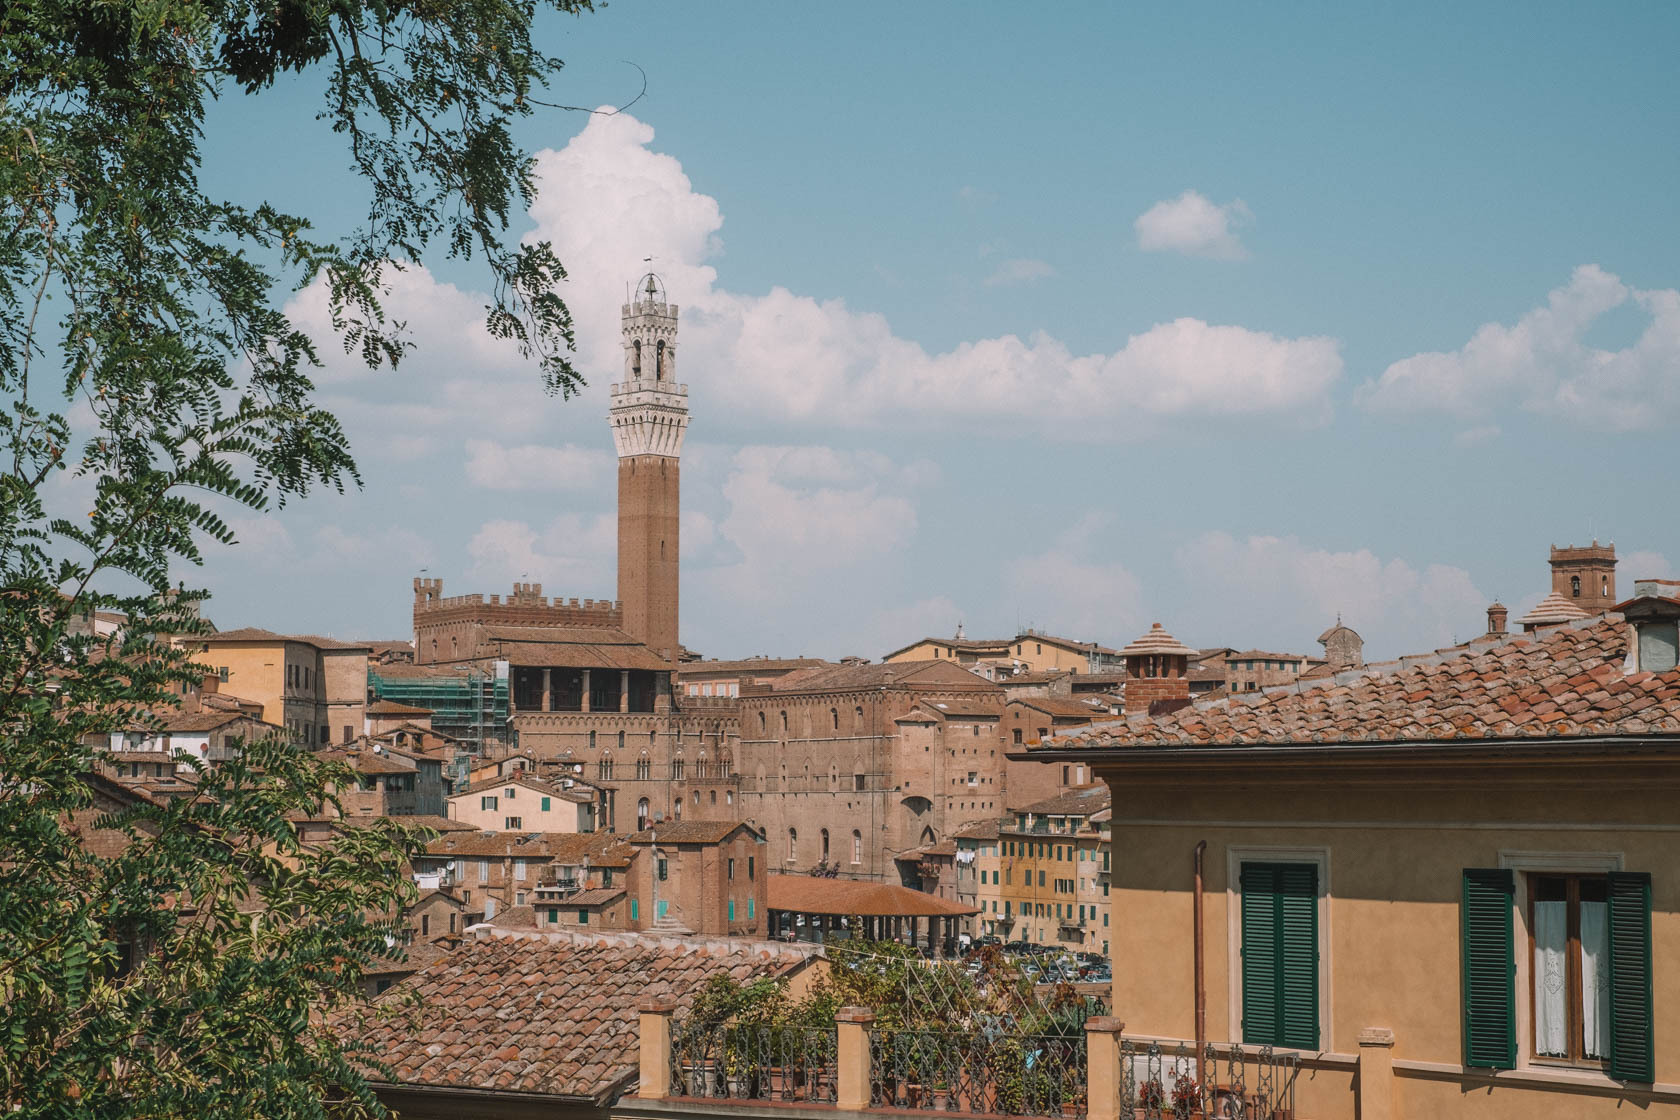 Siena's tower in Italy